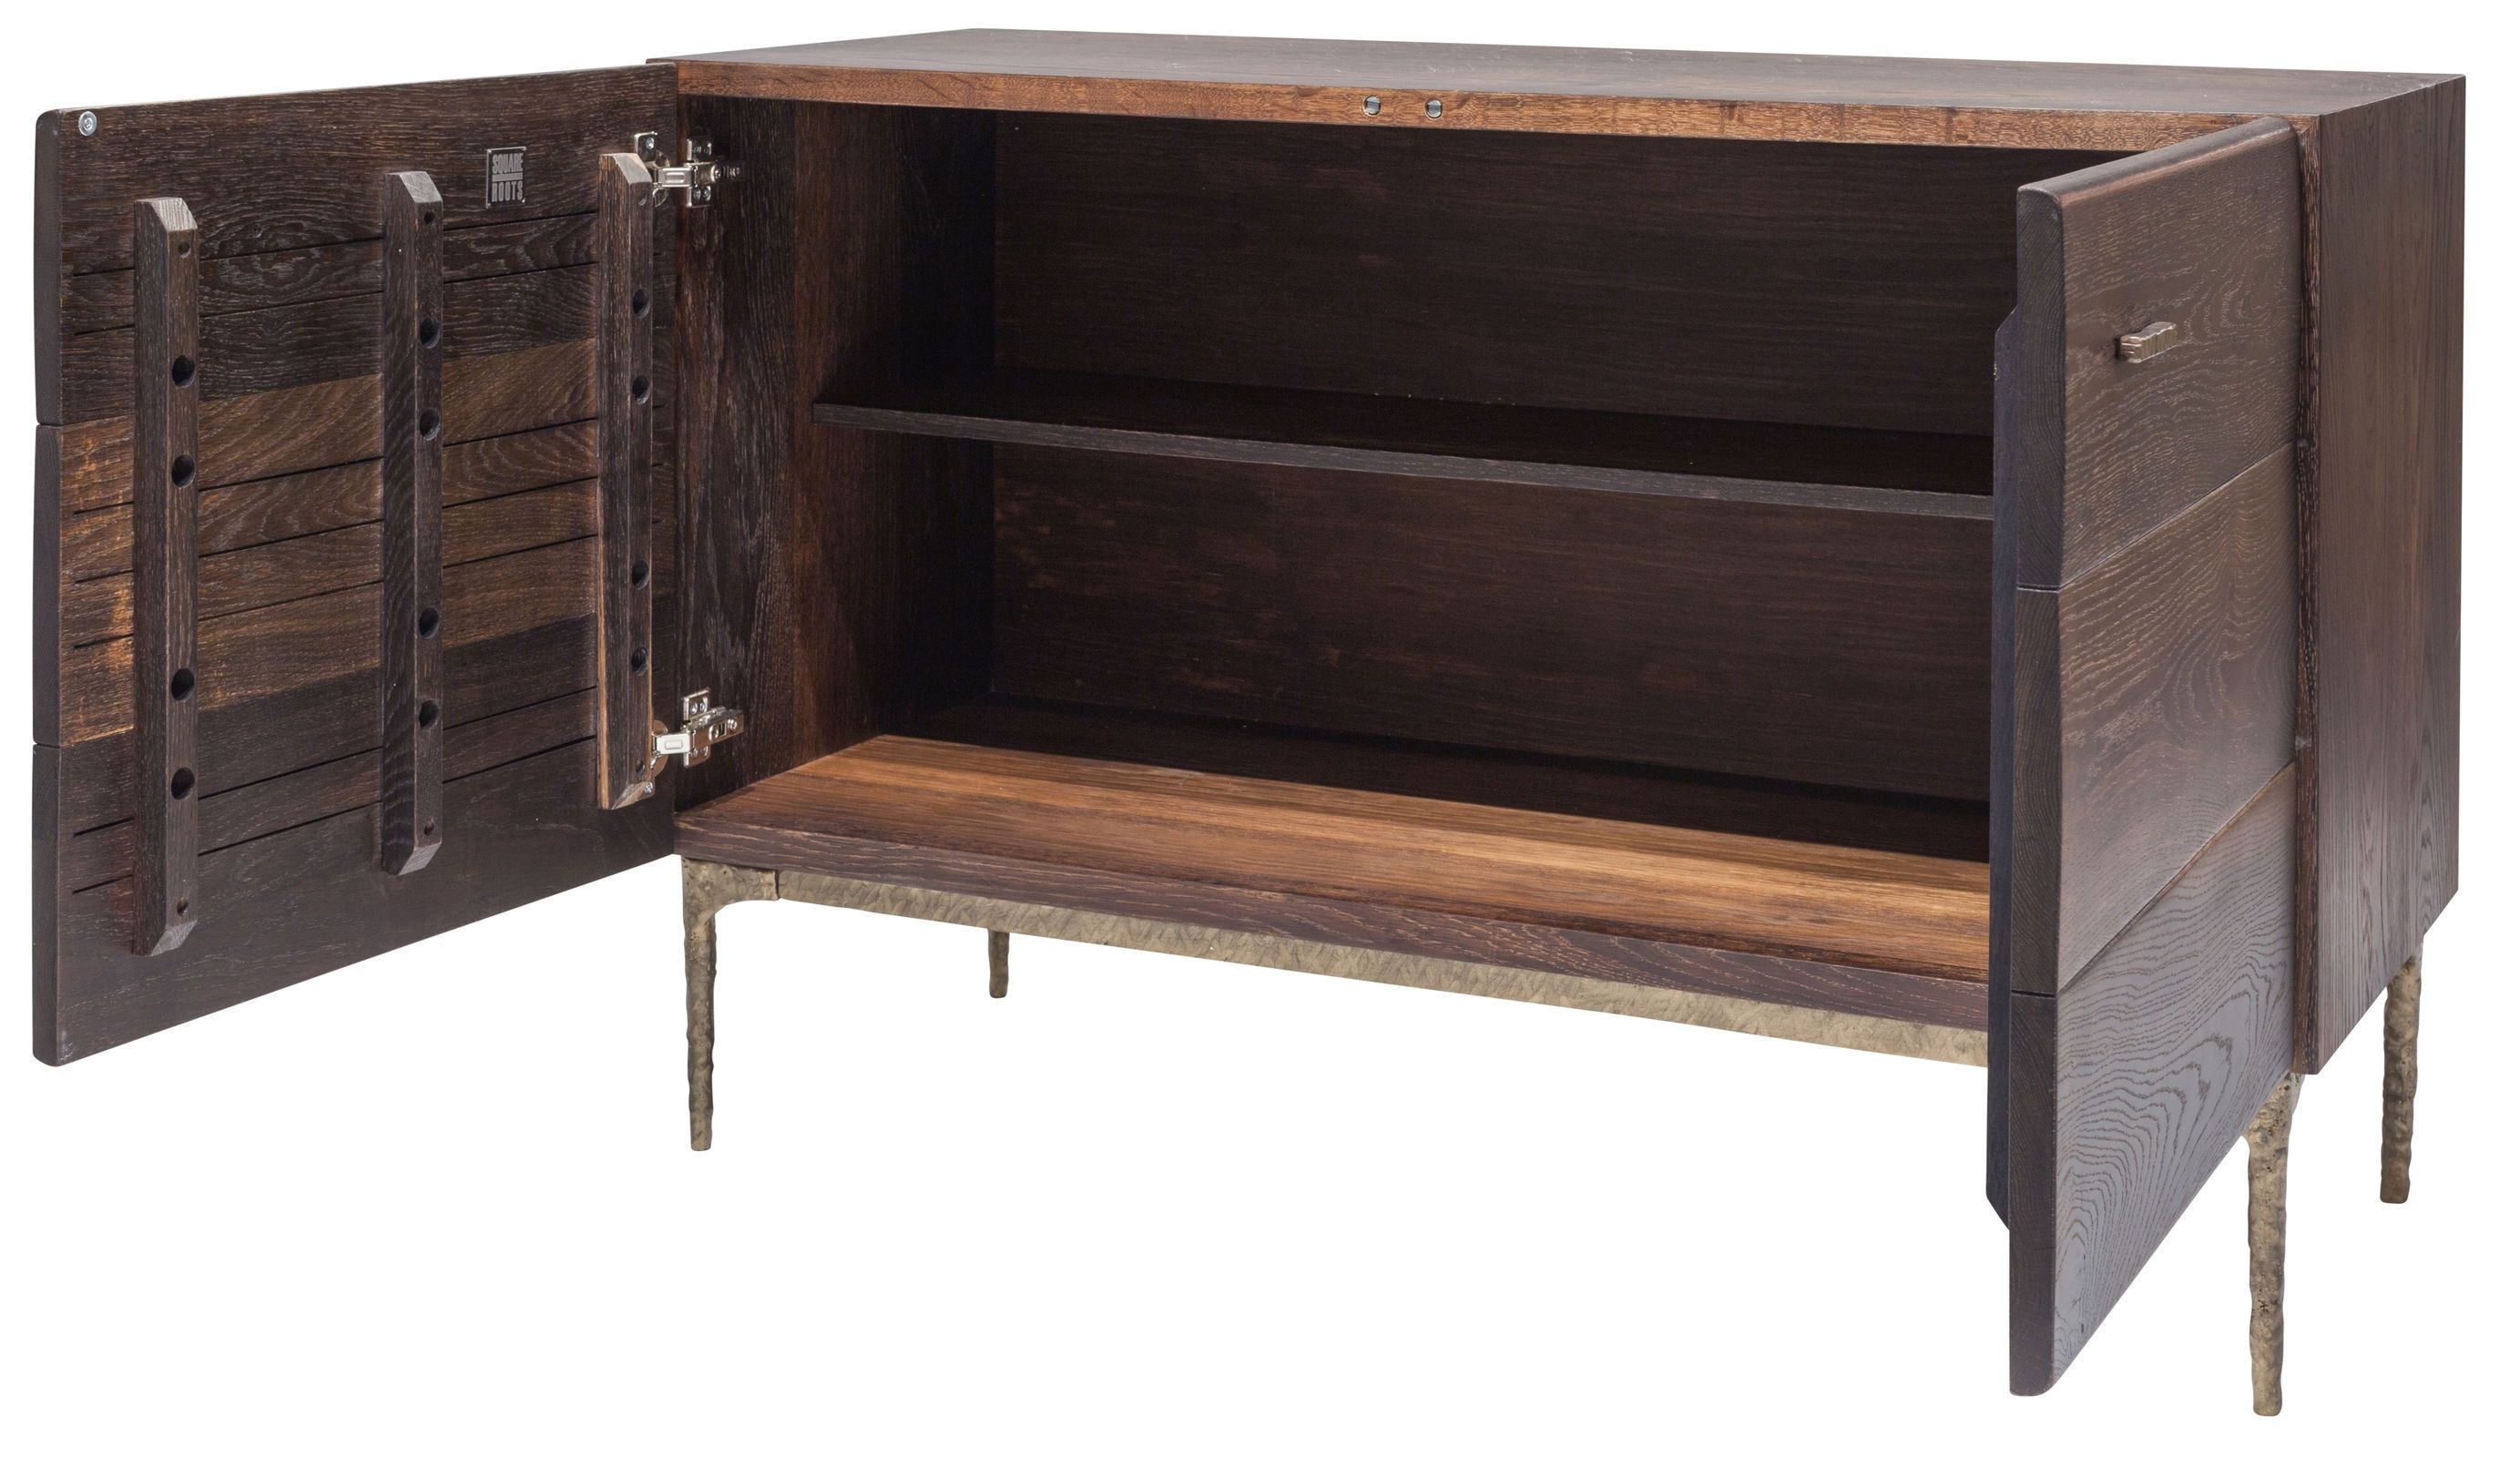 Kulu Sideboard Buffet In Seared Oak And Gilded Bronze Cast Iron Legs With Regard To Iron Sideboards (View 30 of 30)